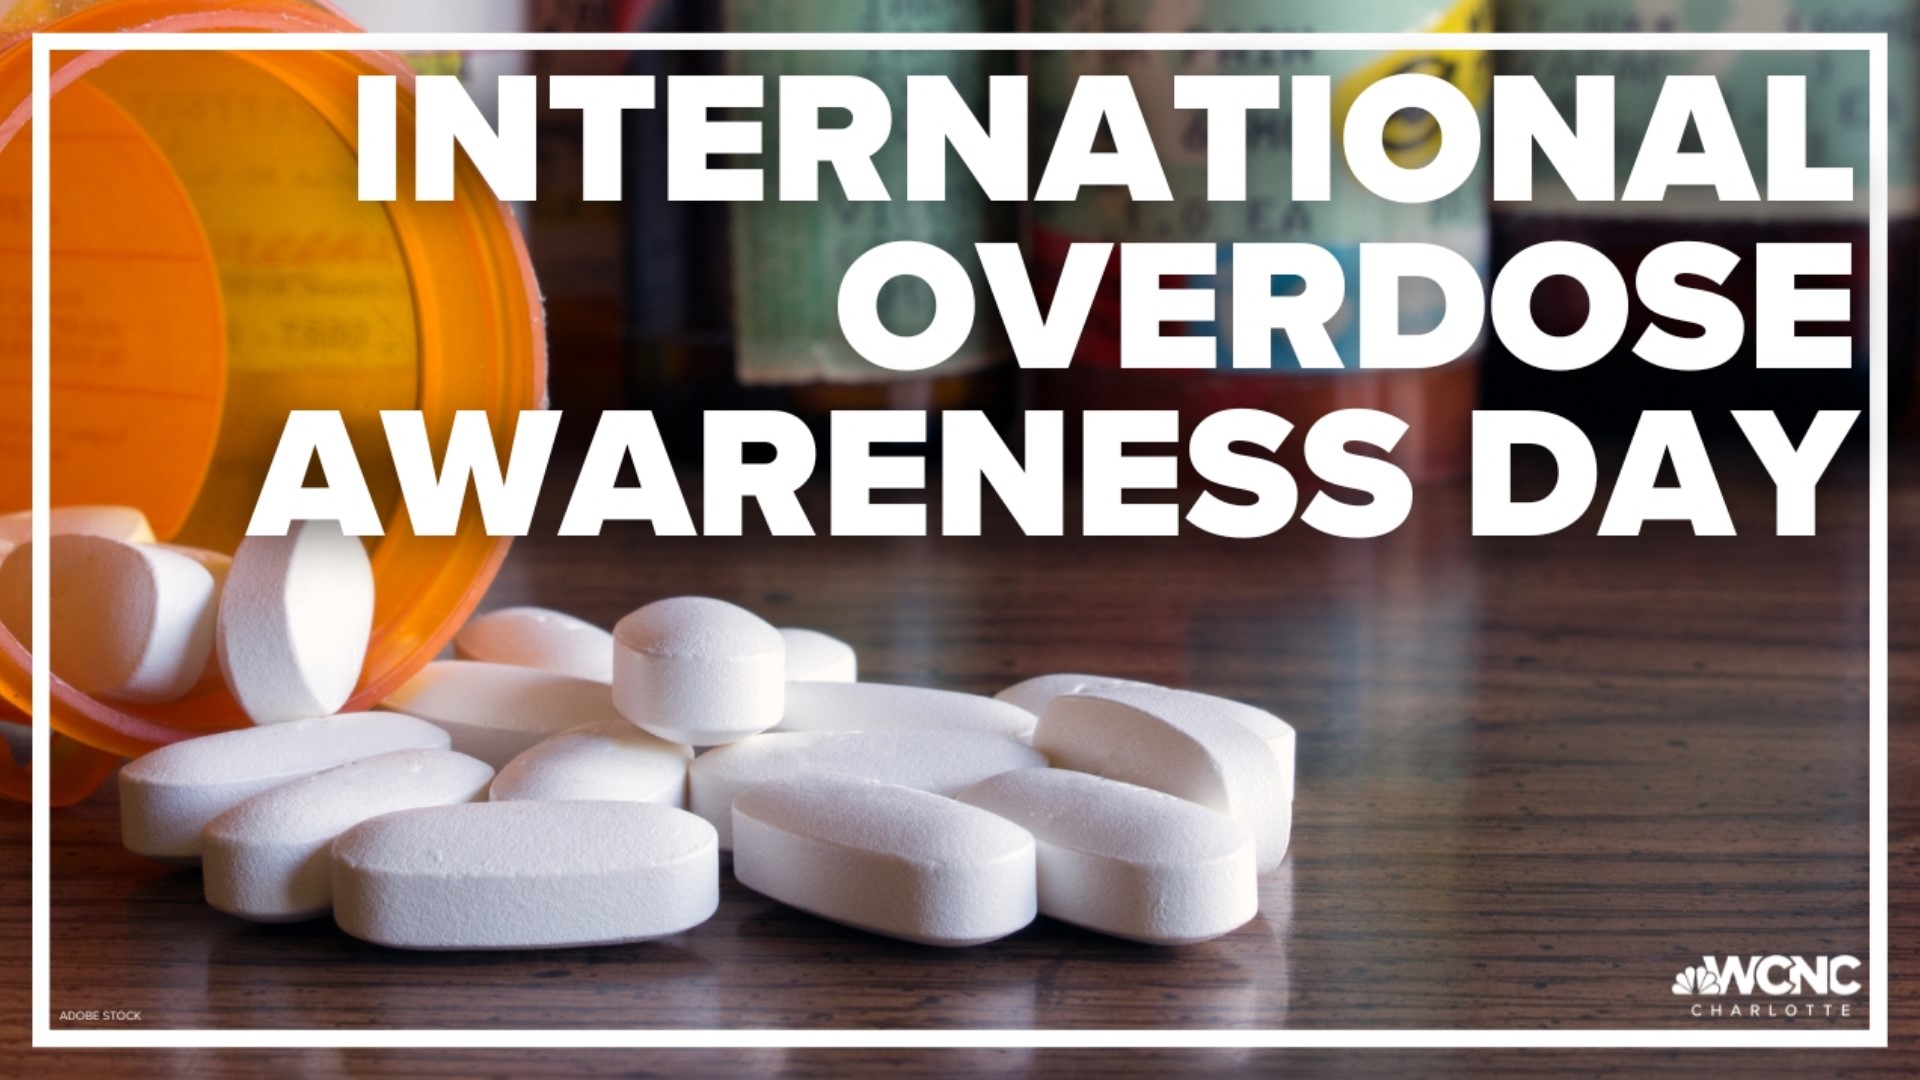 International Overdose Awareness Day comes on the heels of National Recovery Month